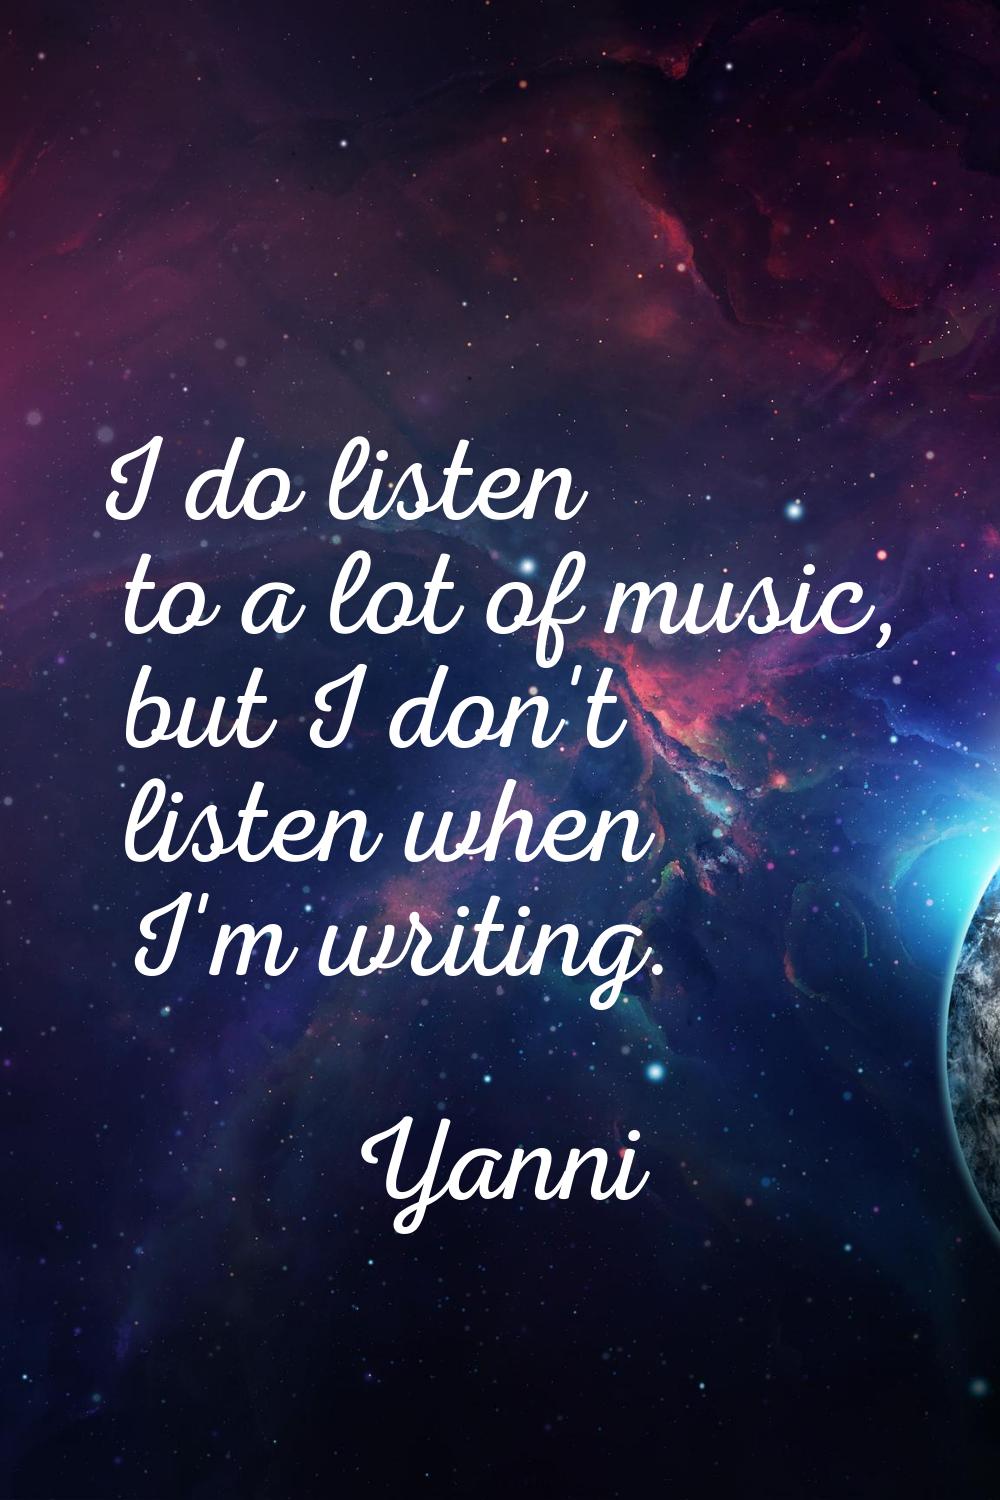 I do listen to a lot of music, but I don't listen when I'm writing.